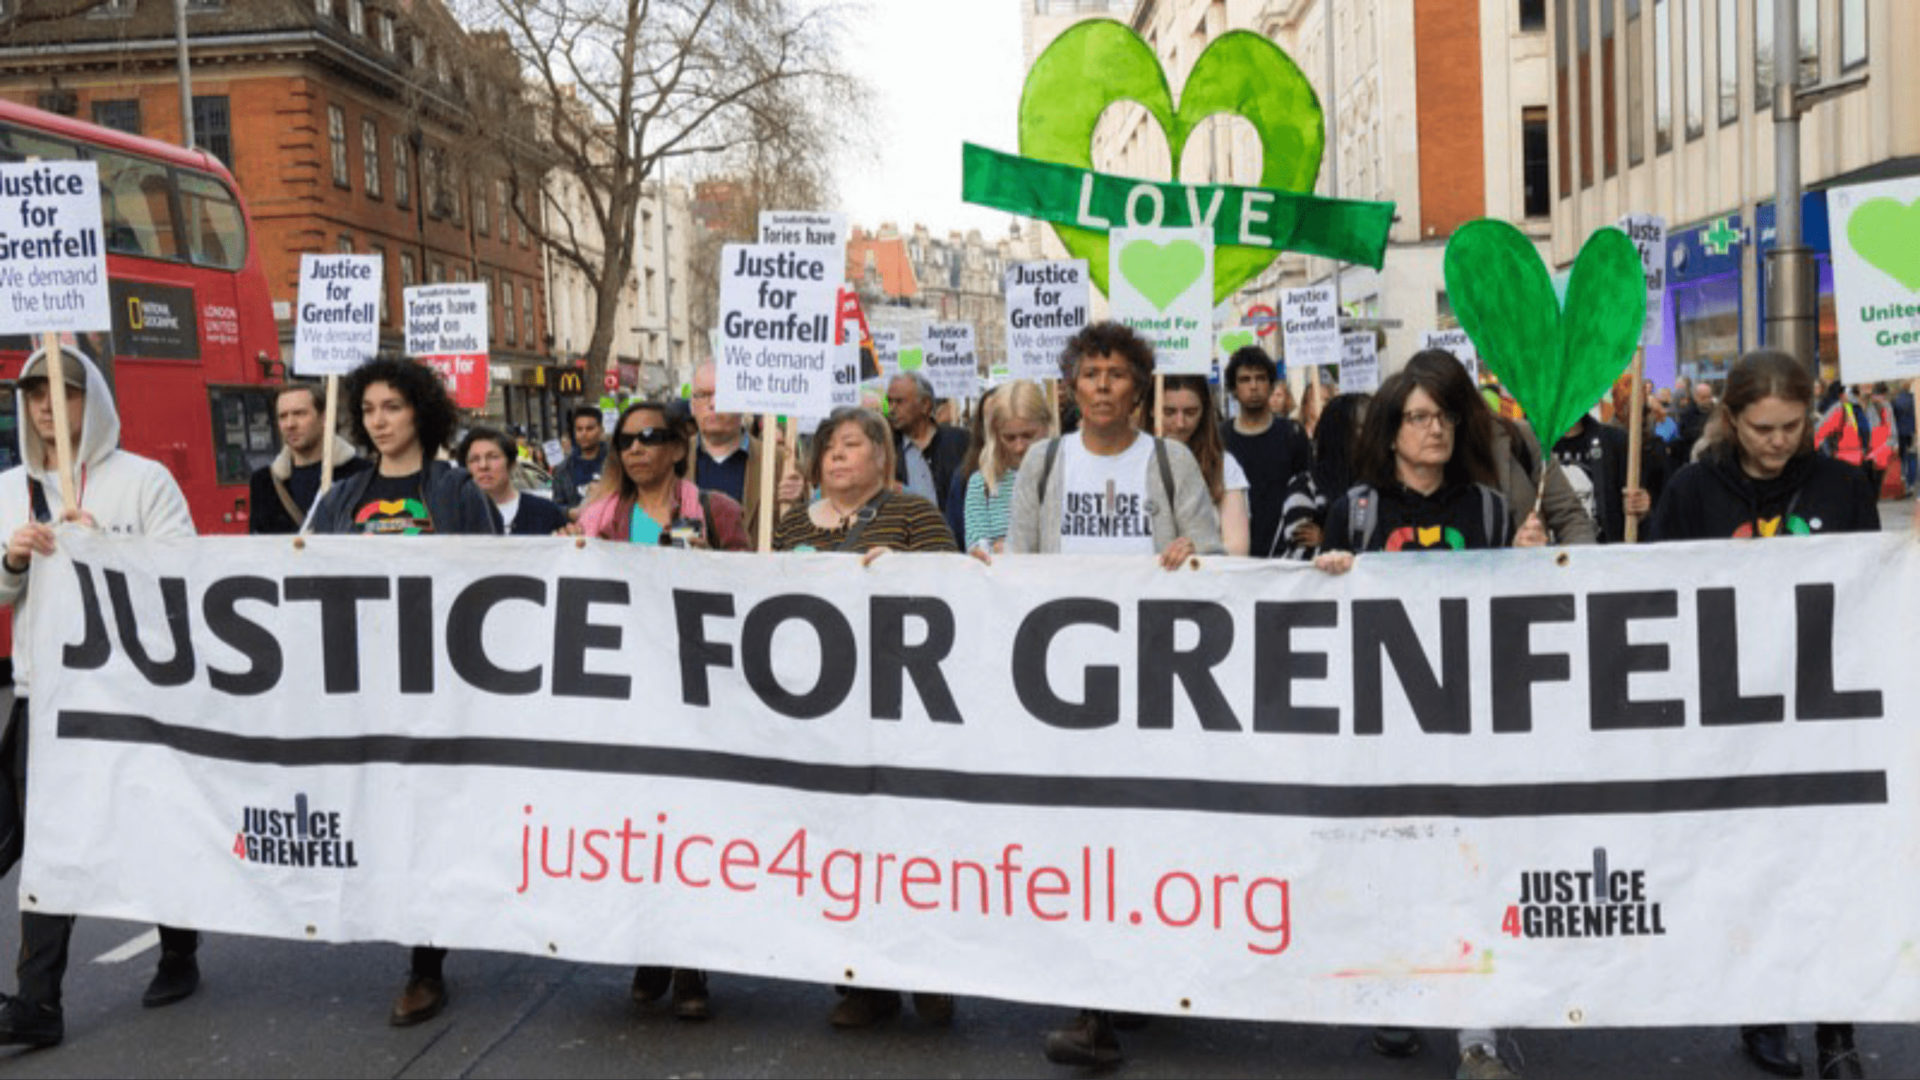 Grenfell report - A very big group of people behind a banner that says 'Justice for Grenfell'